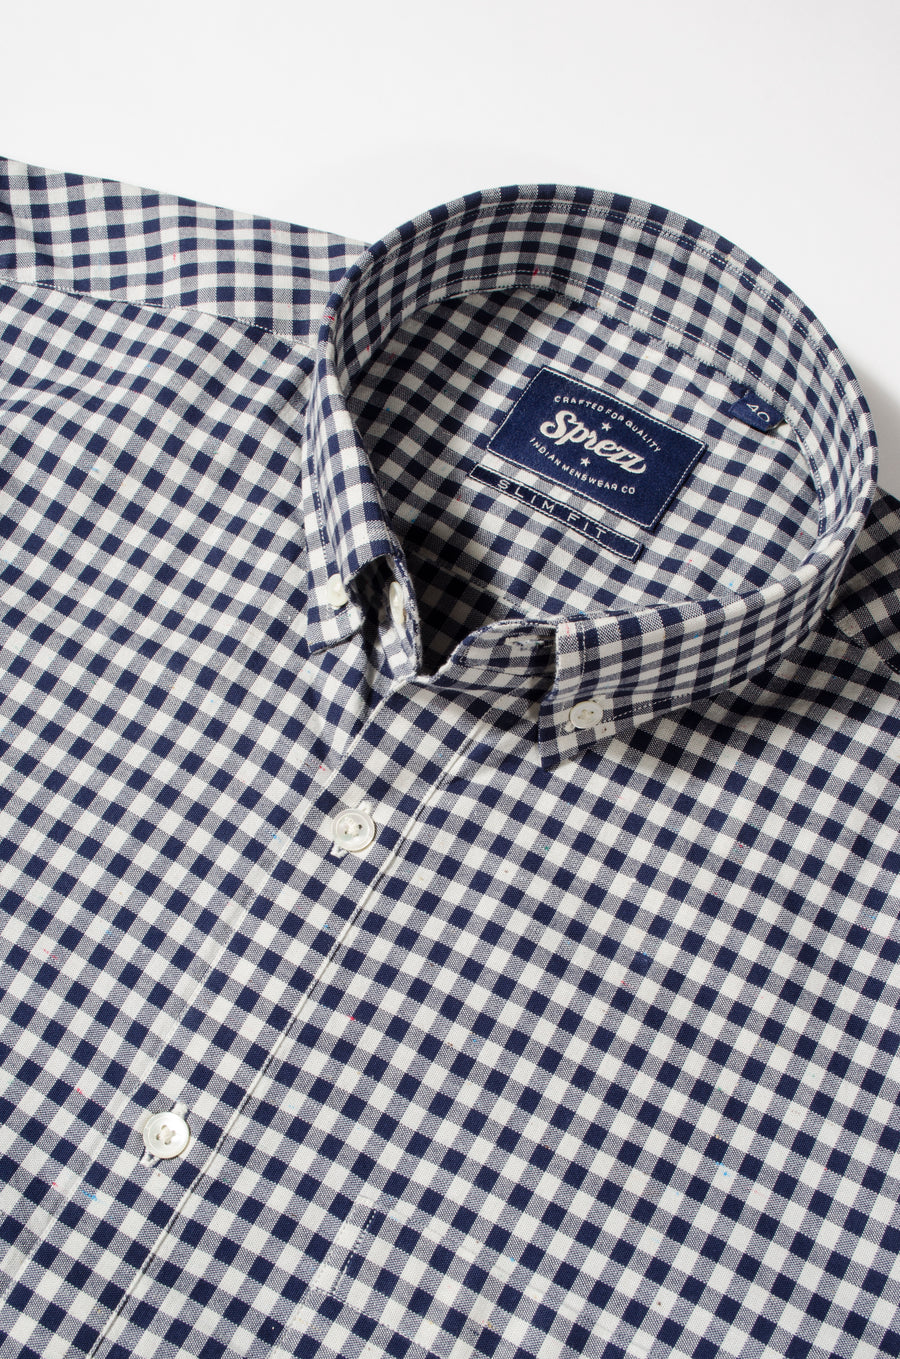 Donegal Navy Blue Gingham Check Button Down Slim Fit Shirt